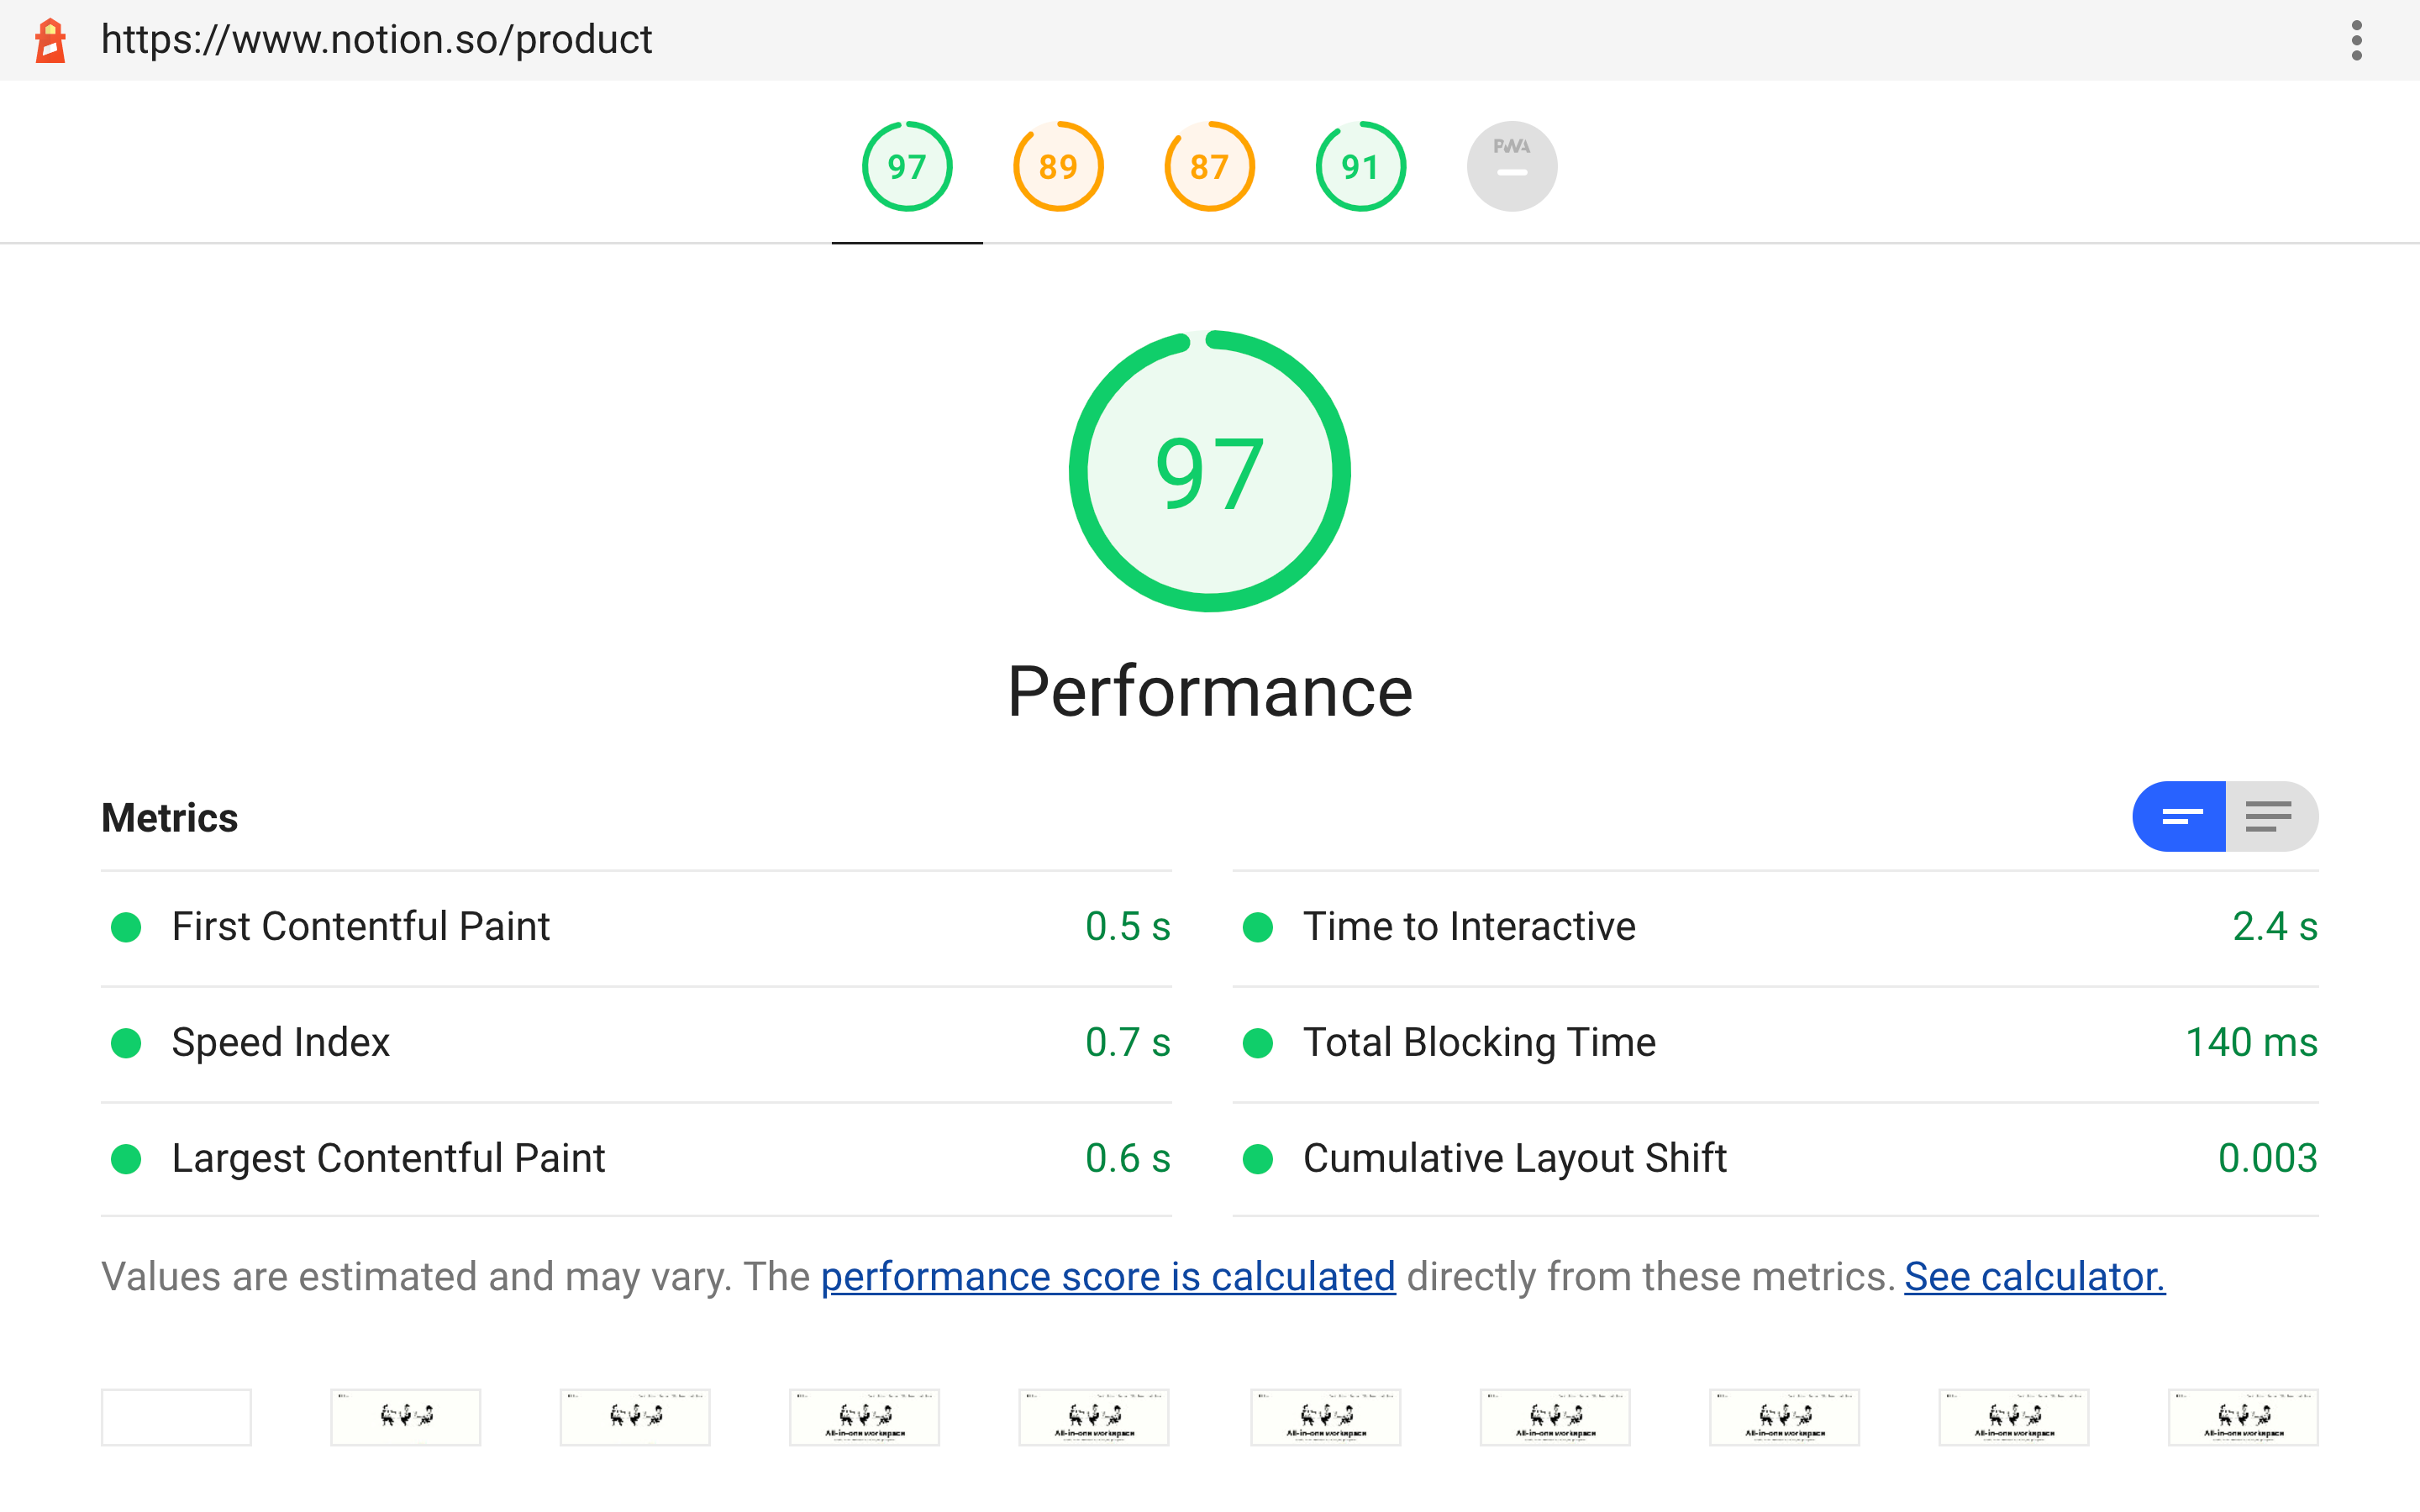 Our new Google Lighthouse score for notion.so/product.